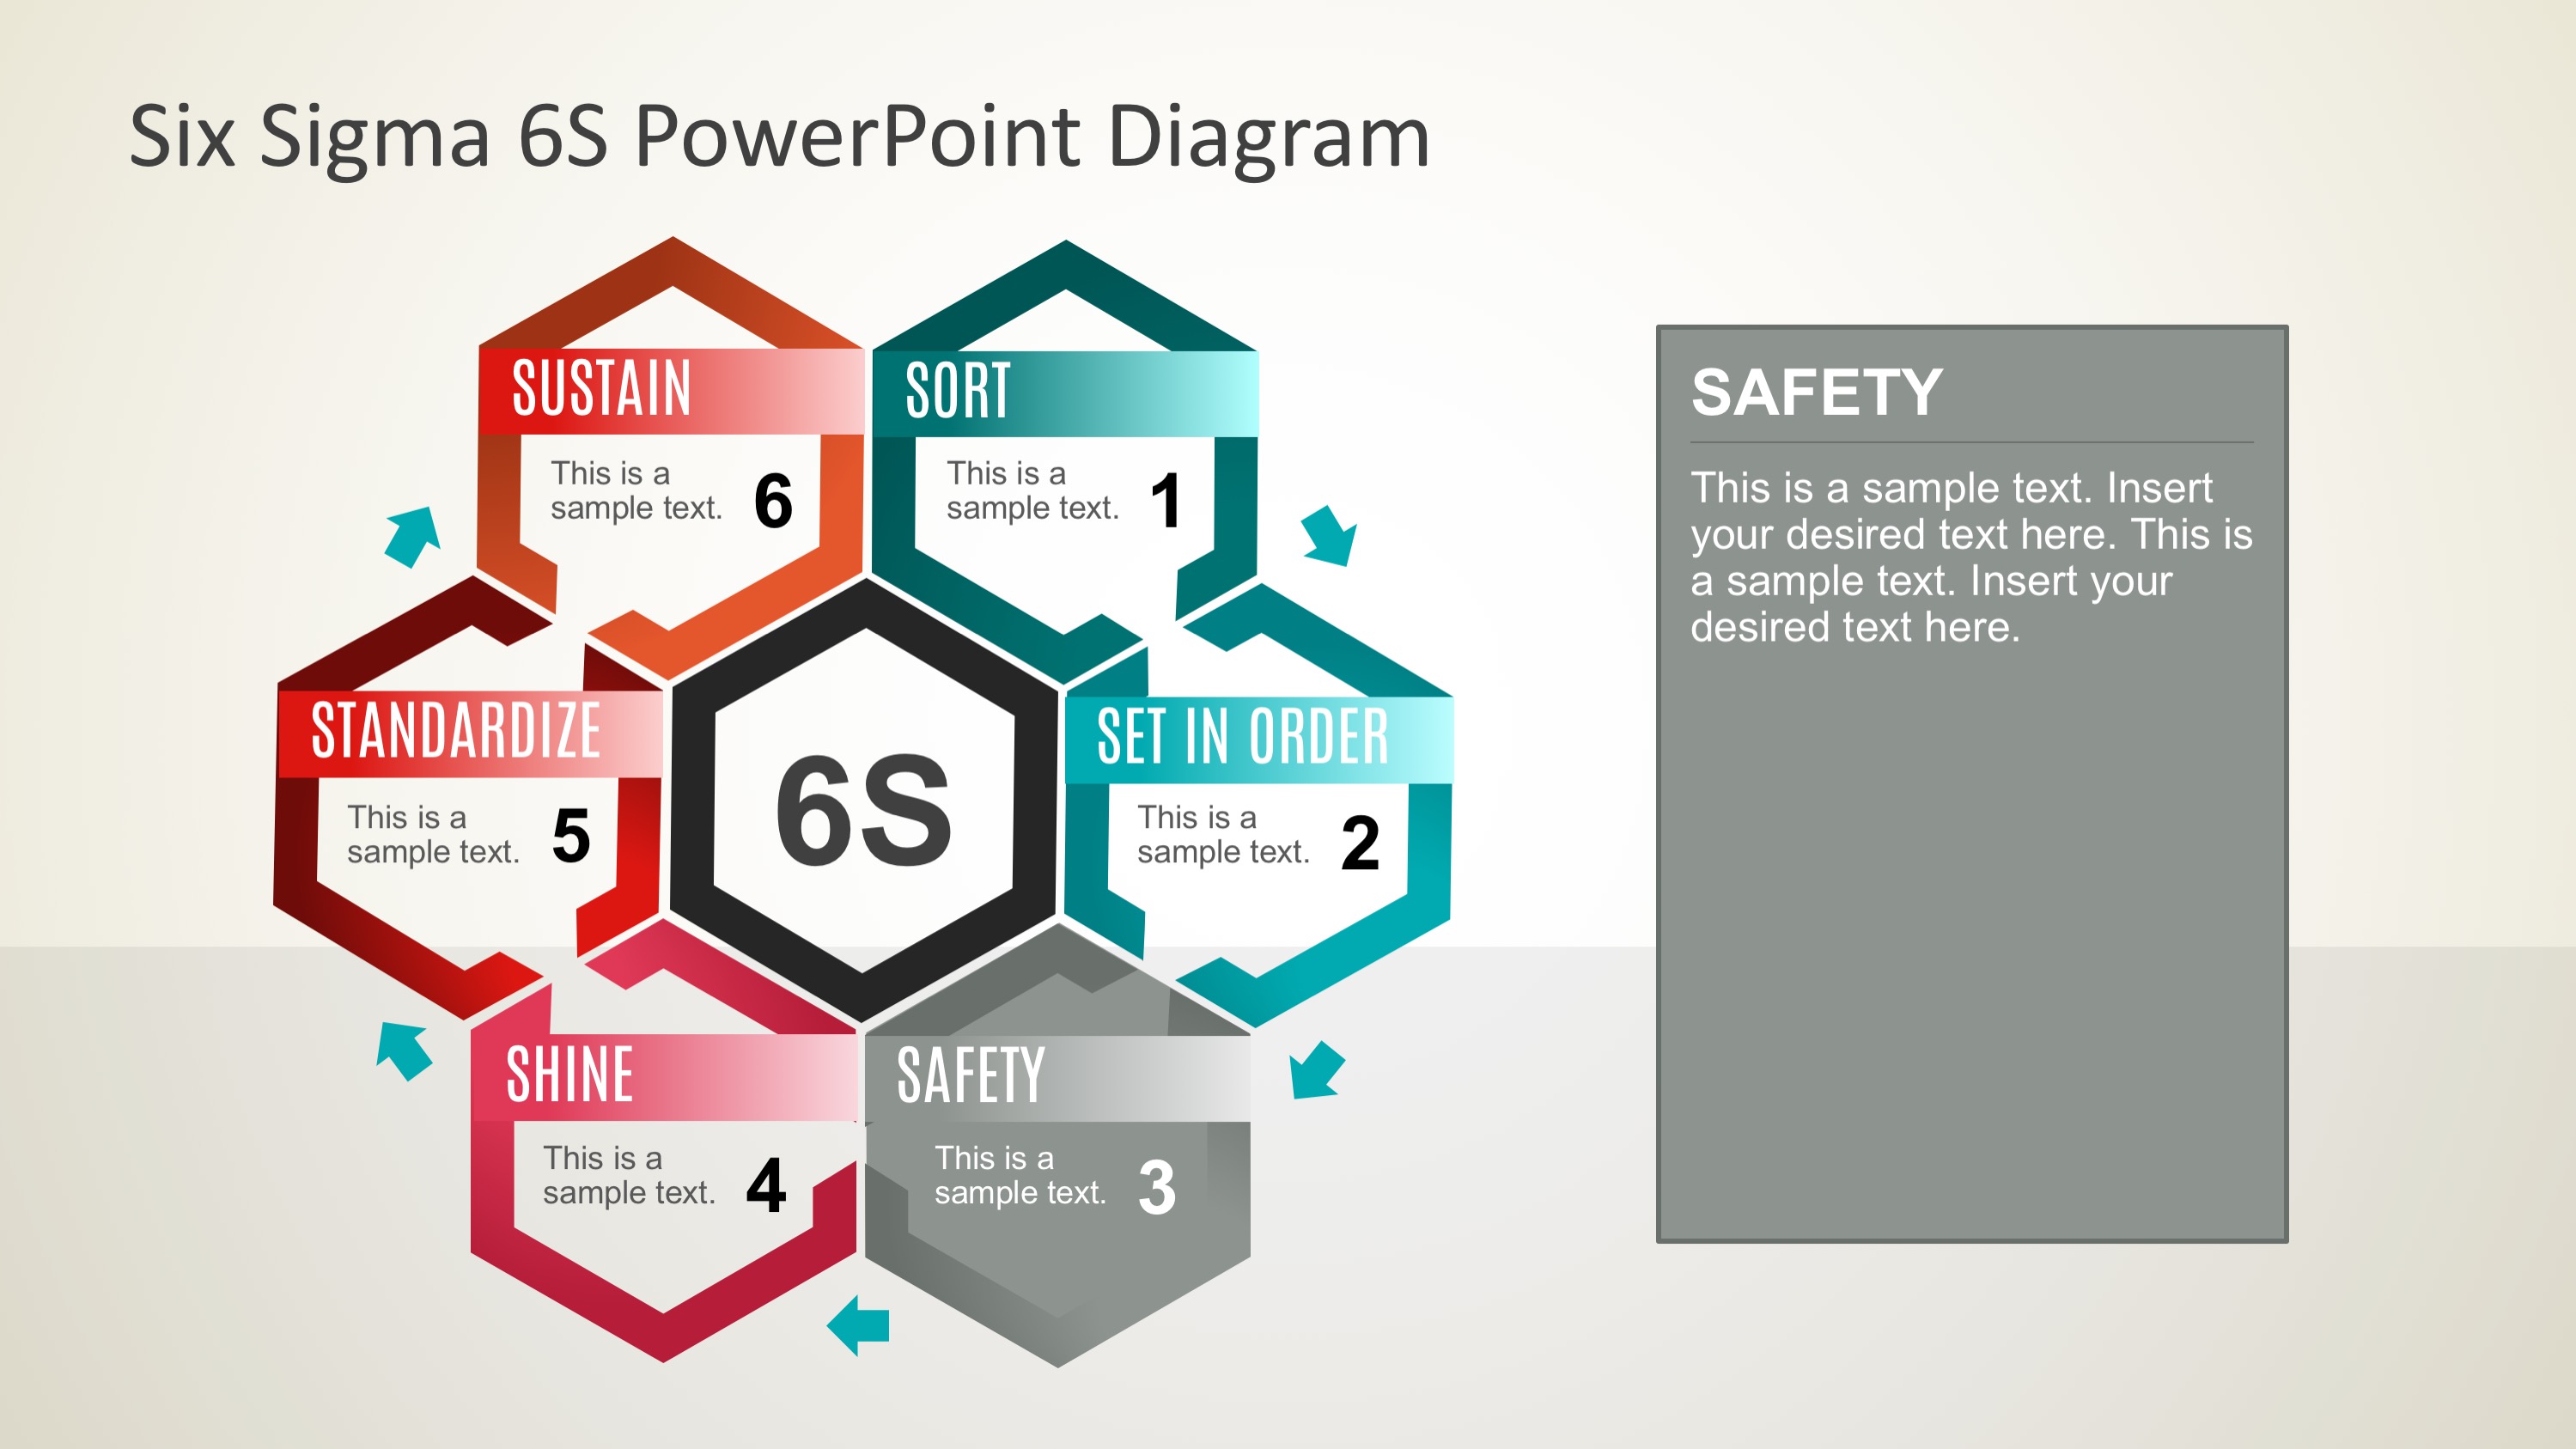 Six Sigma Diagram Template in PowerPoint